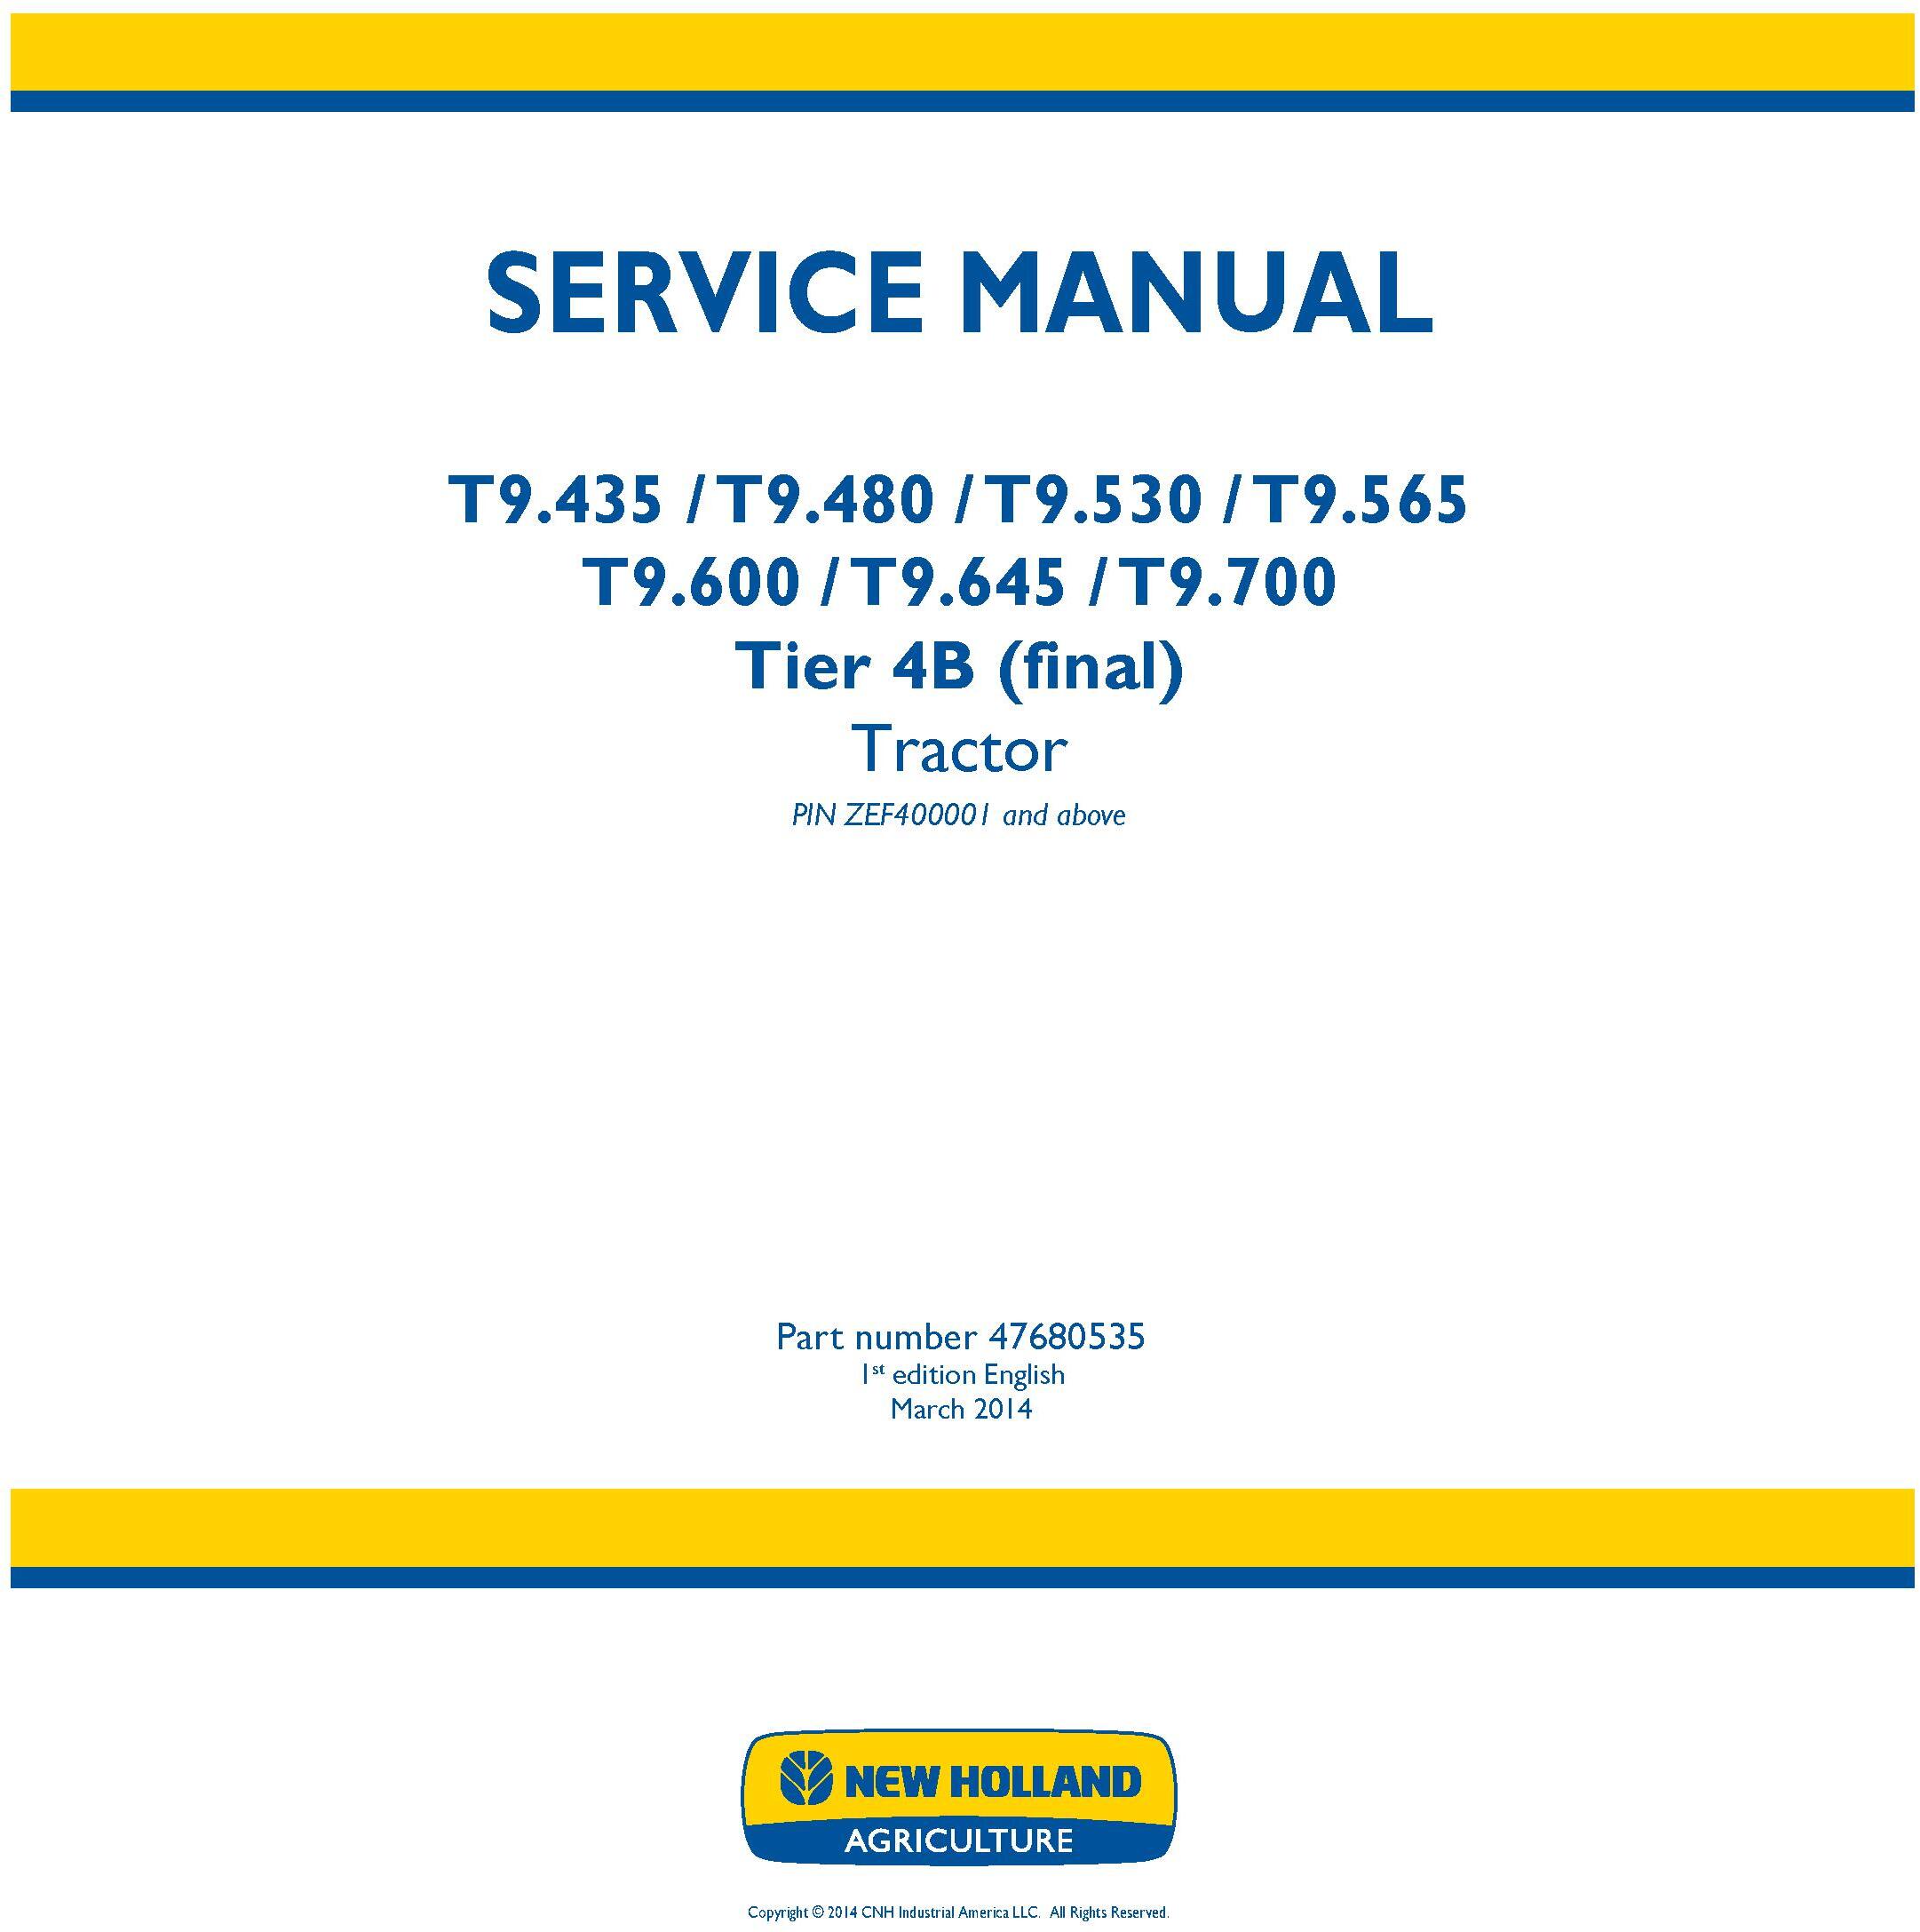 New Holland T9.435, T9.480, T9.530, T9.565, T9.600, T9.645, T9.700 European Tractor Service Manual - 19399